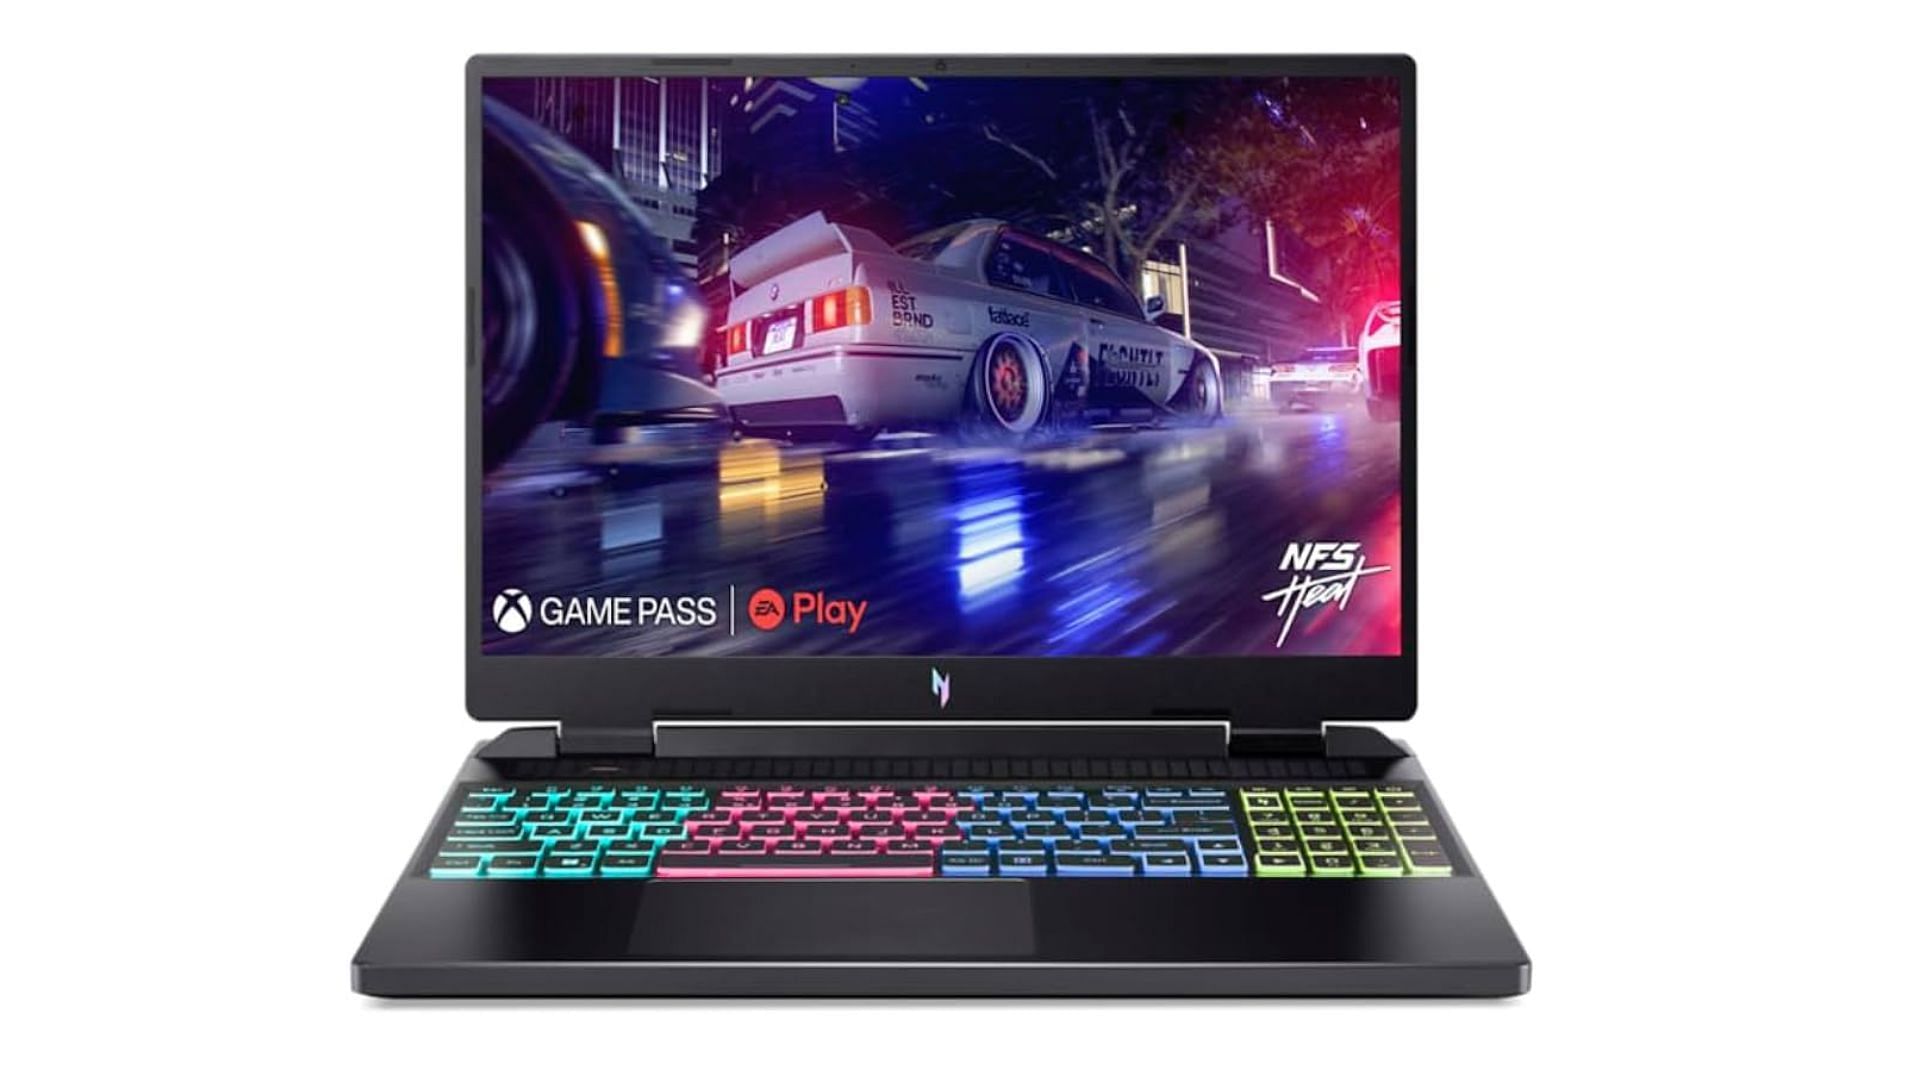 Top pick amid the best Ryzen 7 laptops for gaming (Image via Amazon/Acer)